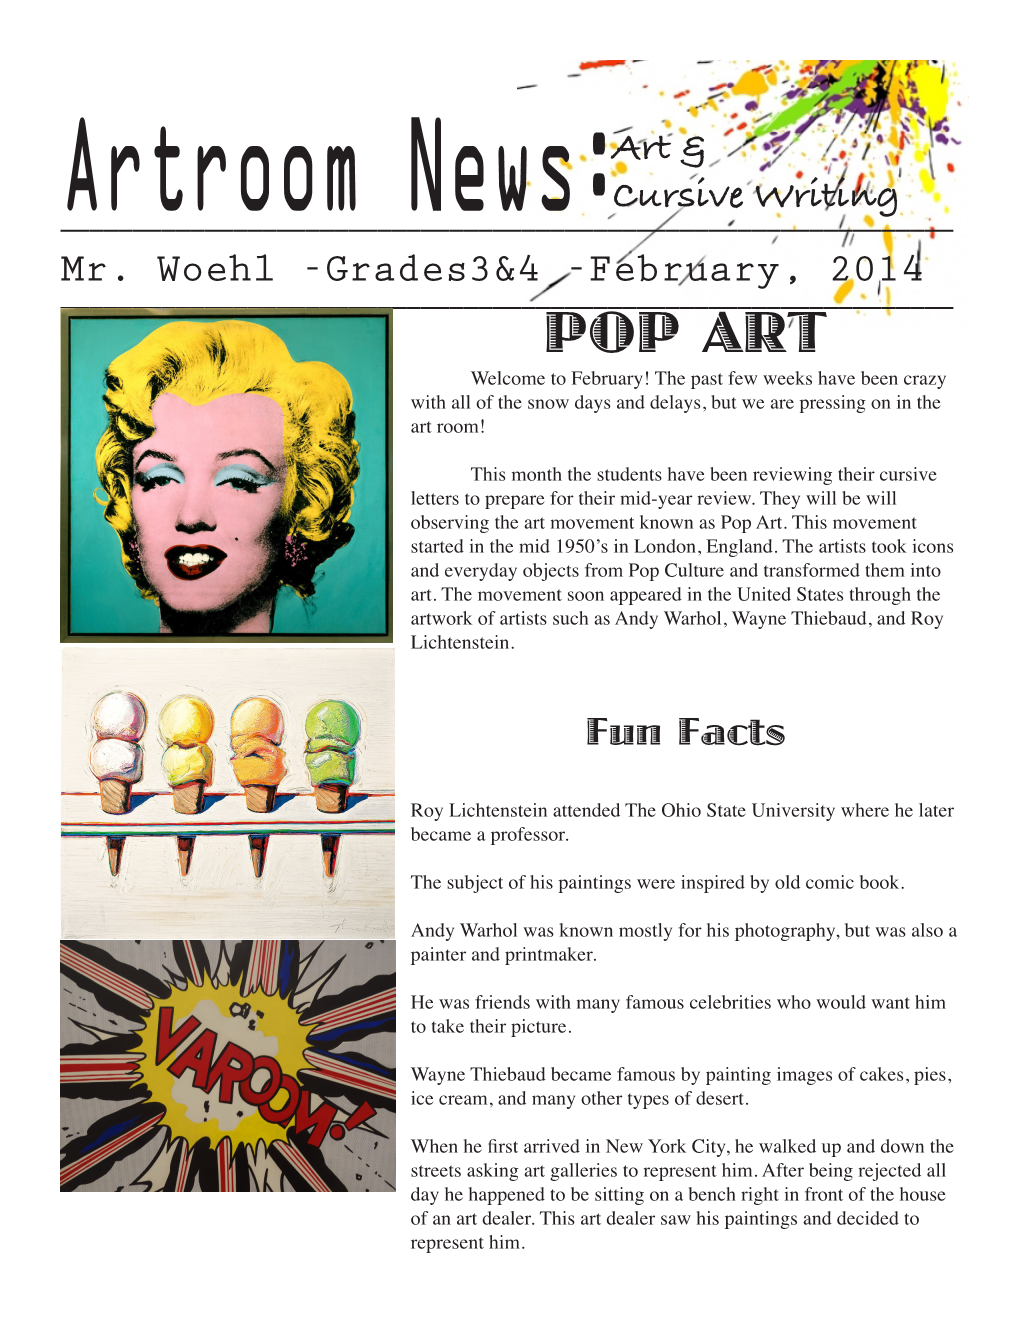 POP ART Welcome to February! the Past Few Weeks Have Been Crazy with All of the Snow Days and Delays, but We Are Pressing on in the Art Room!